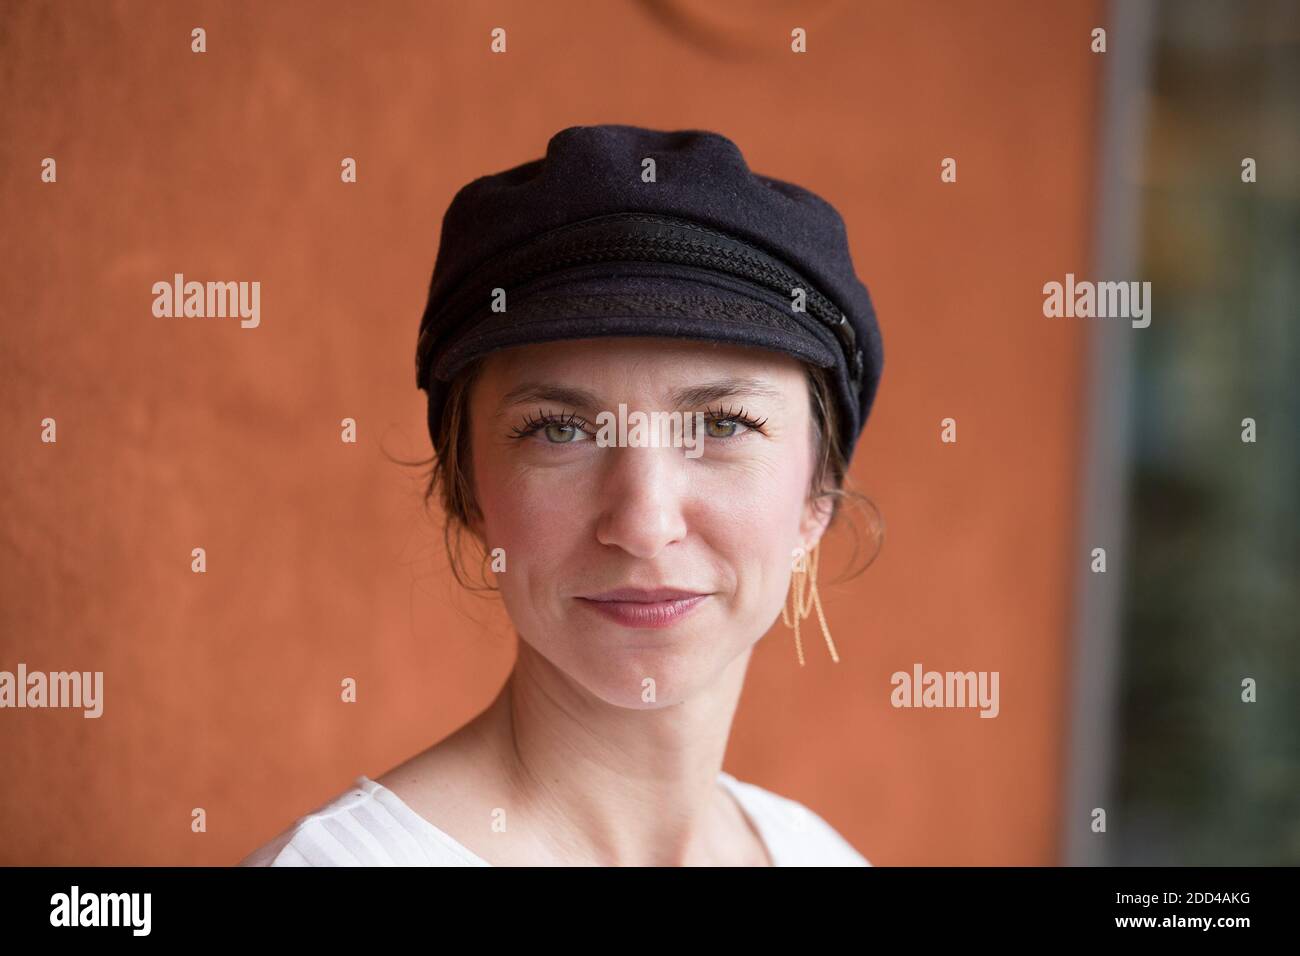 Emilie Caen at Village during French Tennis Open at Roland-Garros arena on  June 03, 2018 in Paris, France. Photo by Nasser Berzane/ABACAPRESS.COM  Stock Photo - Alamy